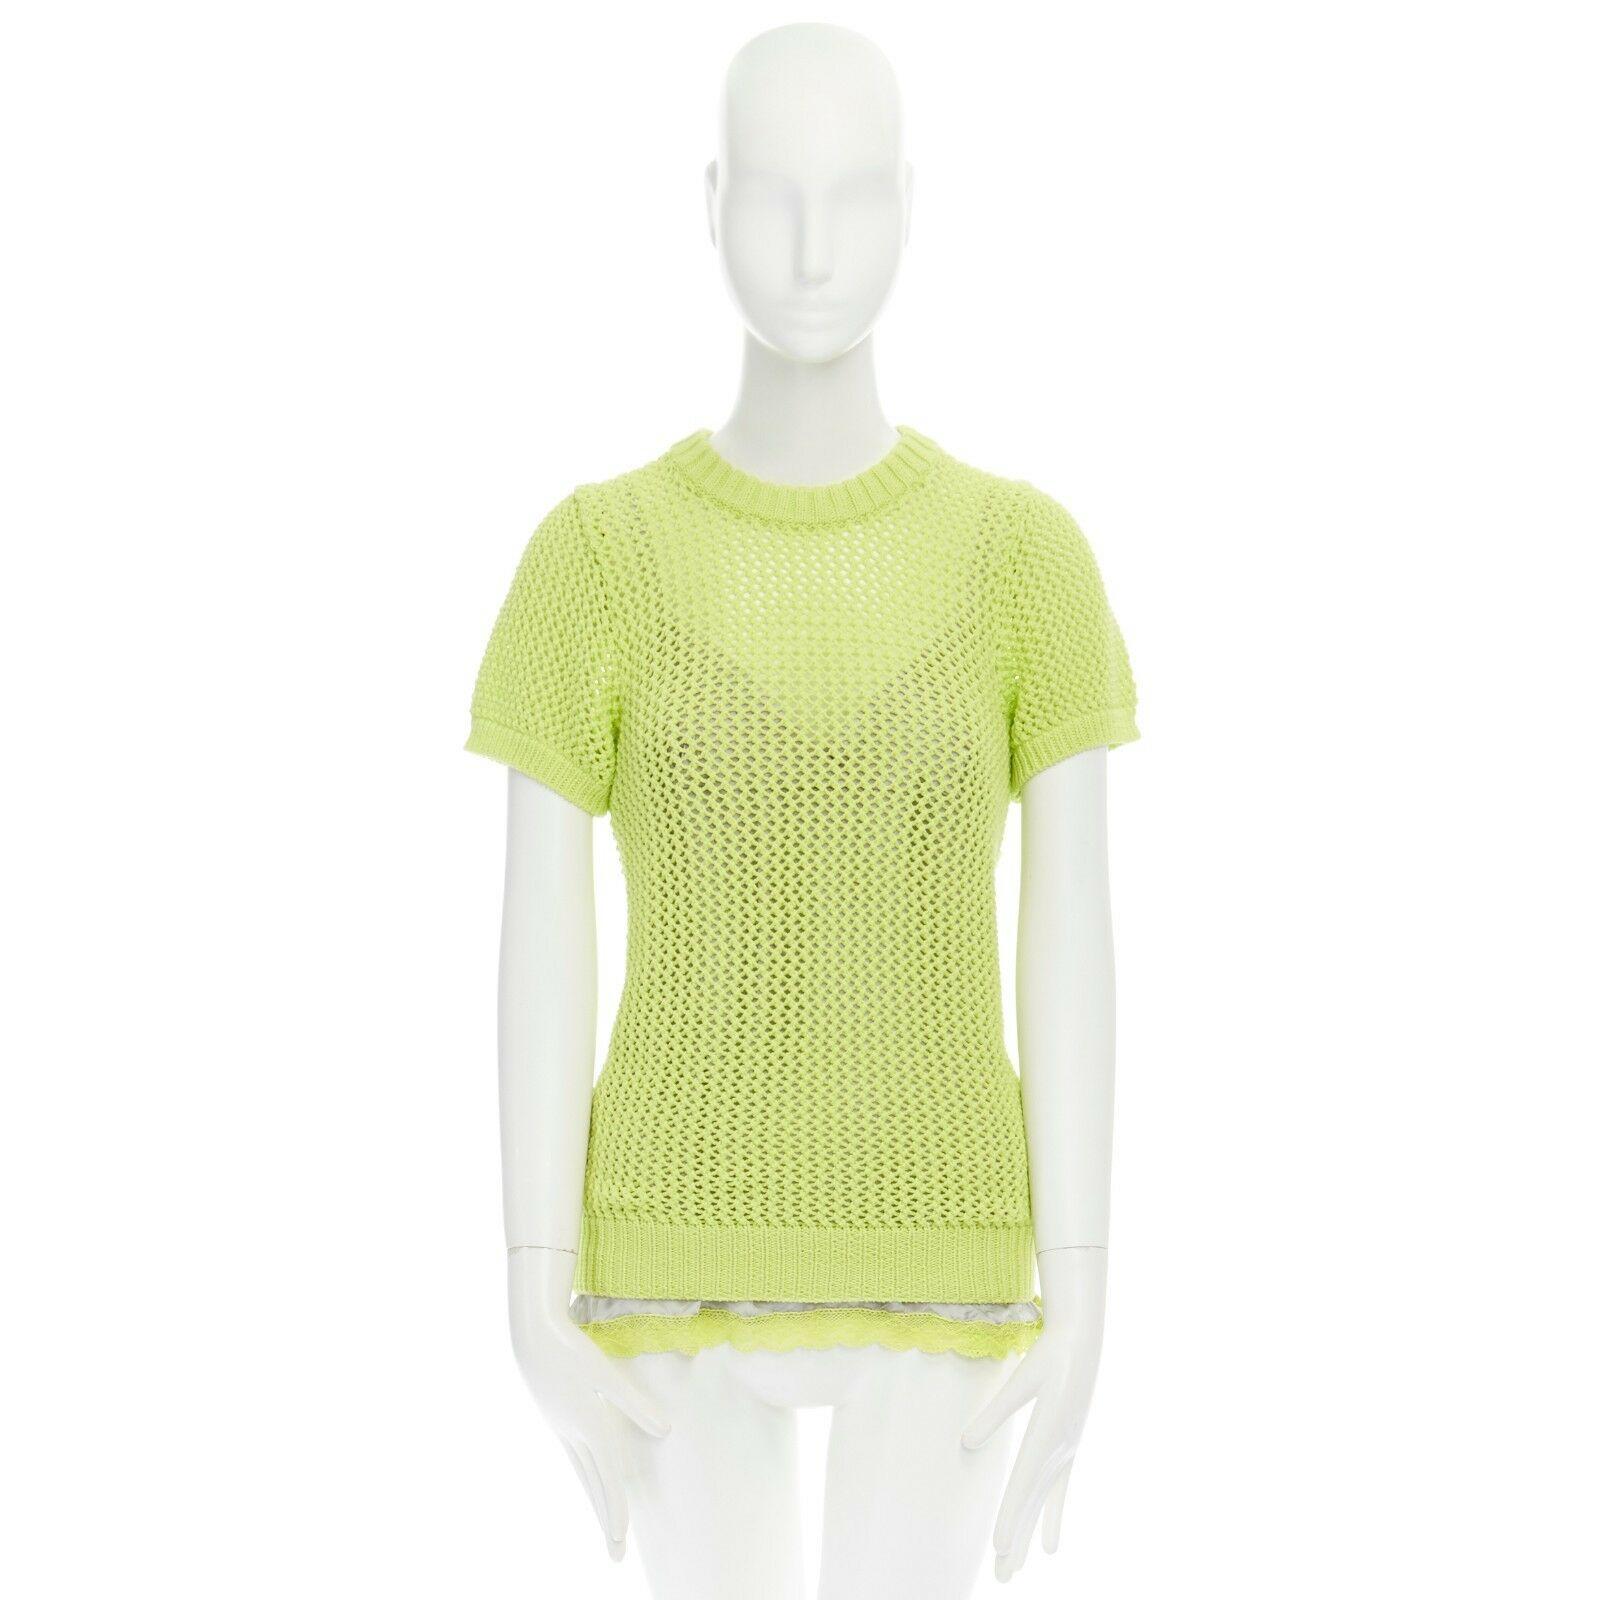 SACAI LUCK neon yellow grey lace trimmed camisole crochet knit sweater top JP3 L Reference: TGAS/A00021 
Brand: Sacai 
Designer: Chitose Abe 
Material: Cotton 
Color: Yellow 
Pattern: Other 
Extra Detail: Neon yellow crochet. Ribbed neck. Attached